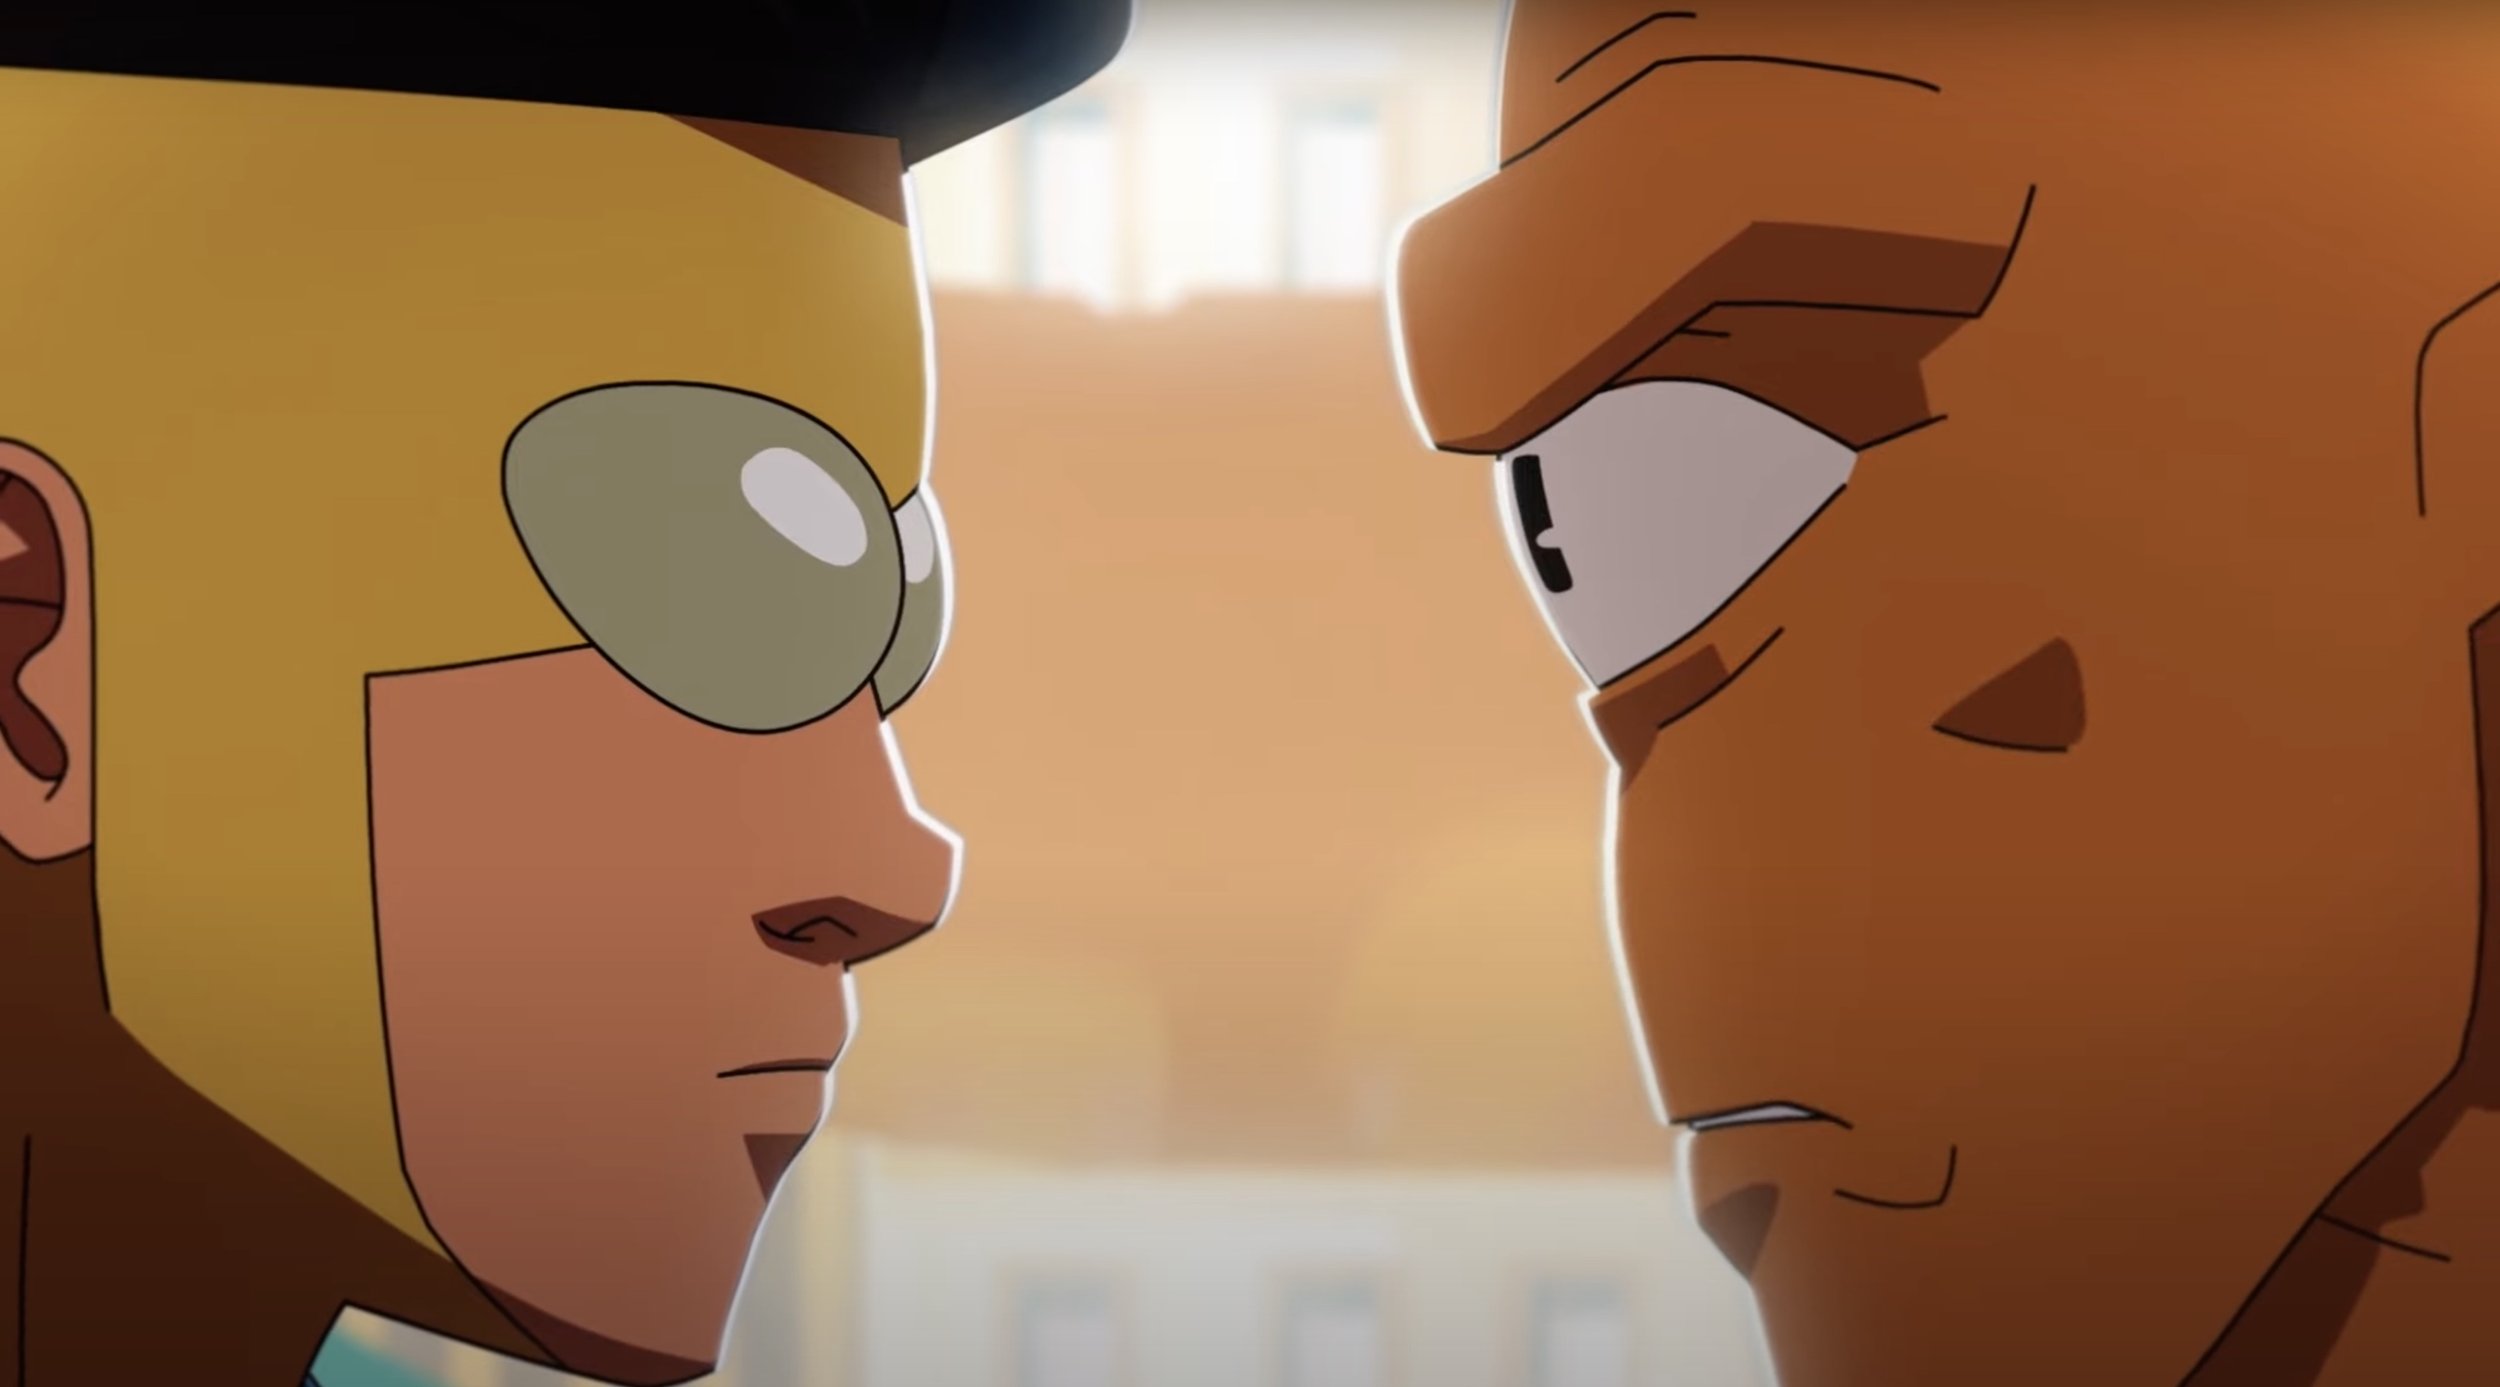 Watch the thrilling new trailer for Invincible season 2